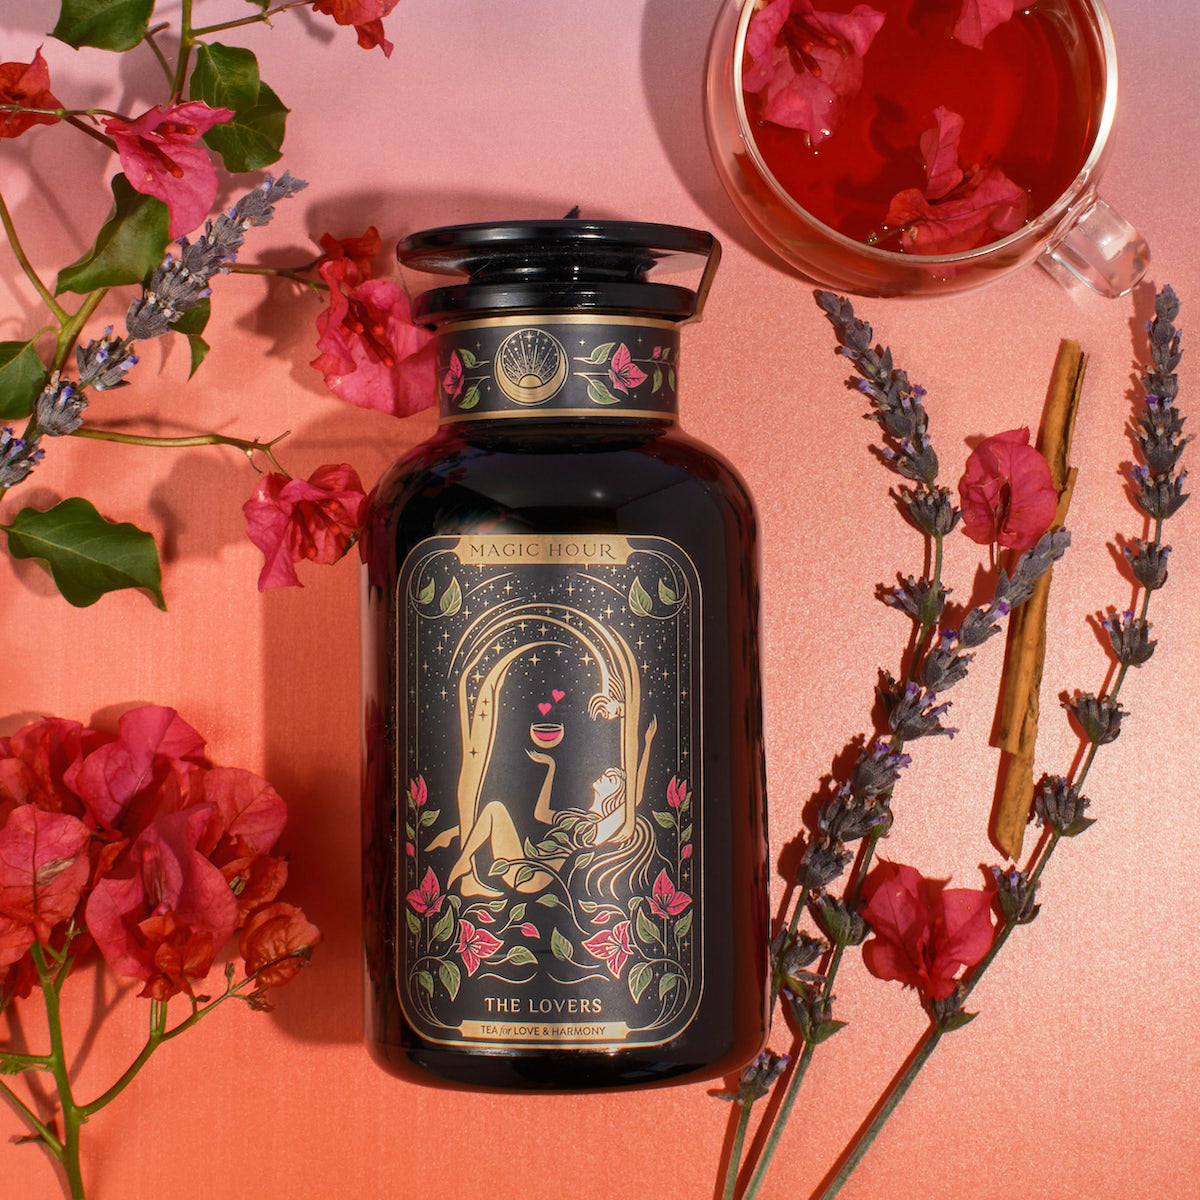 Dark glass container labeled &quot;Magic Hour - The Lovers,&quot; surrounded by pink flowers, lavender stalks, cinnamon stick, and Organic Hibiscus on a gradient pink background. A teacup with red tea is positioned in the top right corner of the image.